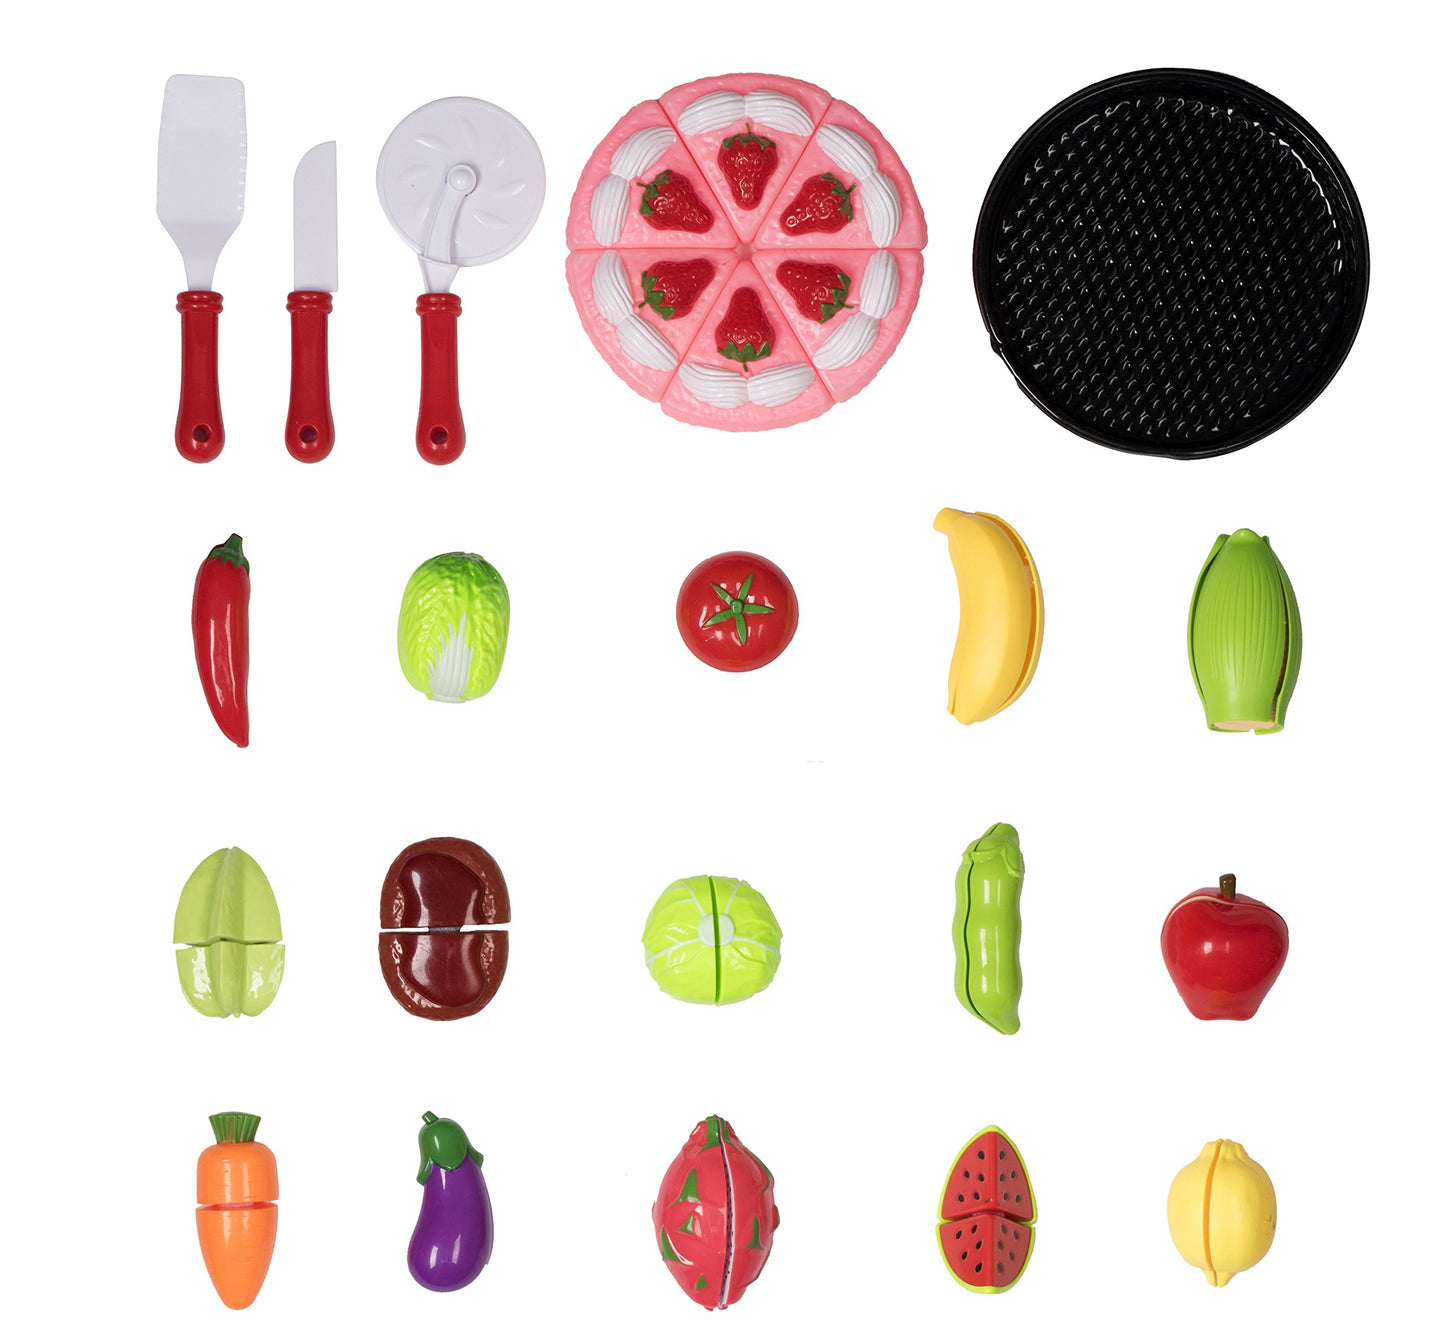 Play Food Kitchen Toys Set - 72 Piece Fake Fruits And Vegetables Toddler Cutting Play-Set